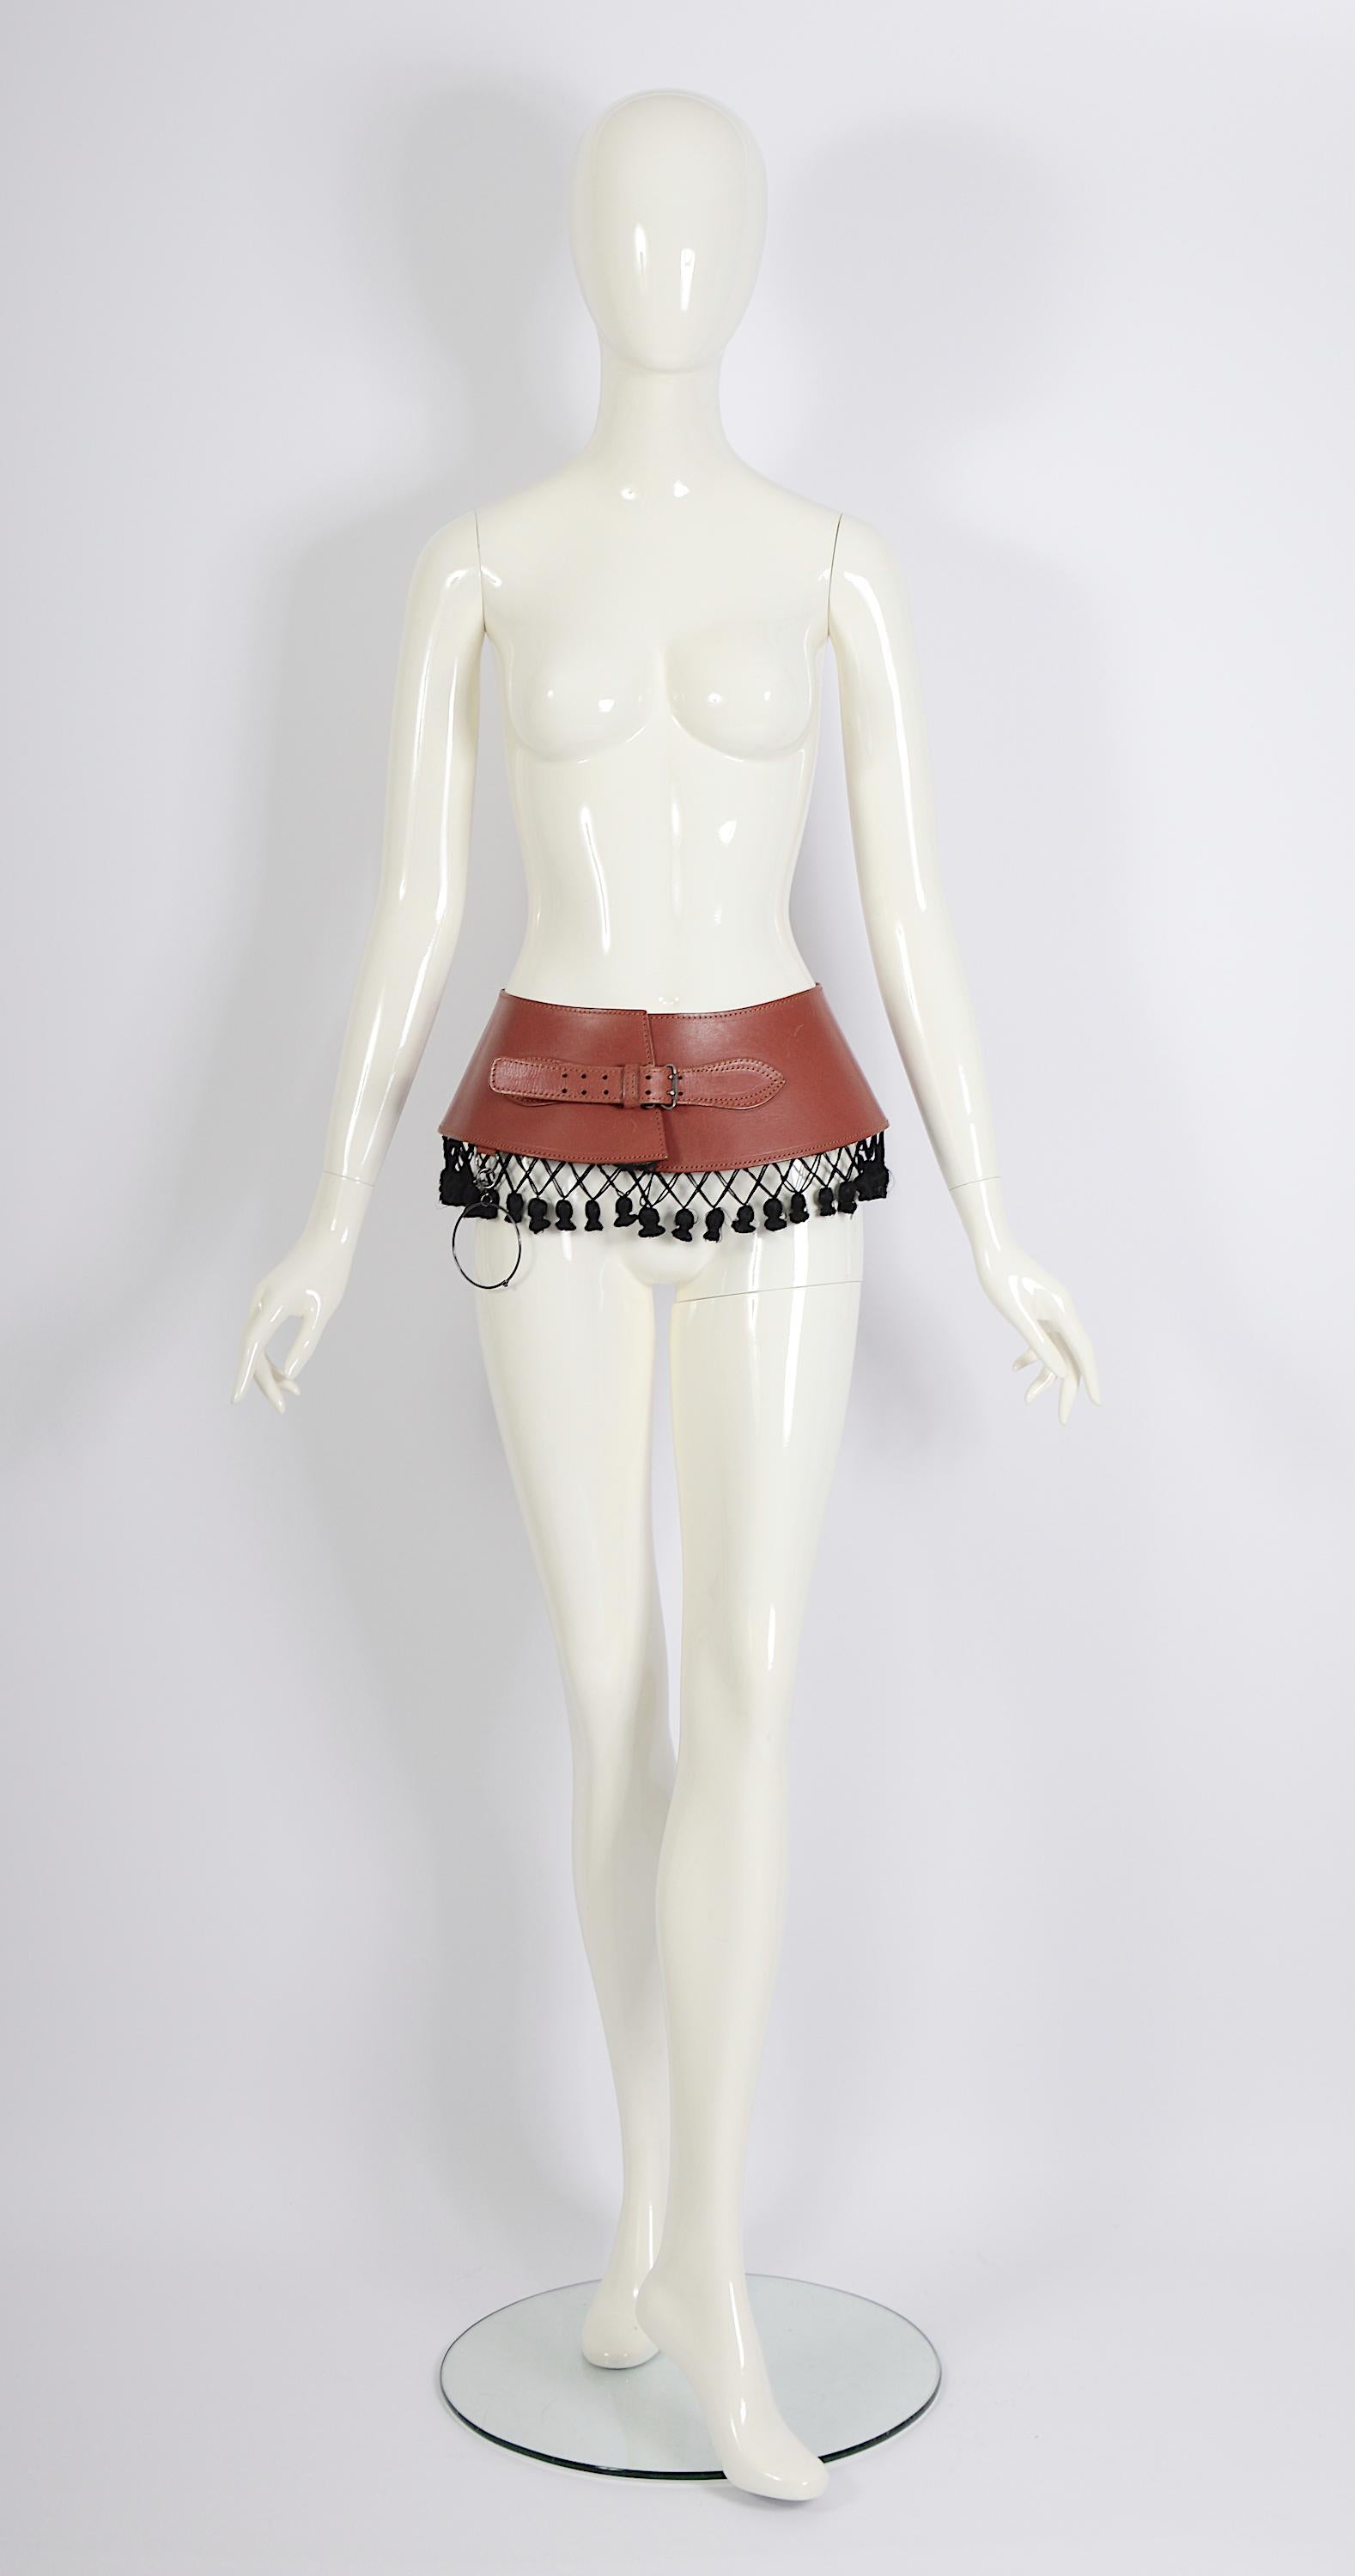 Jean Paul Gaultier by Gibo 1980s tassel embellished wide brown leather belt In Excellent Condition For Sale In Antwerpen, Vlaams Gewest